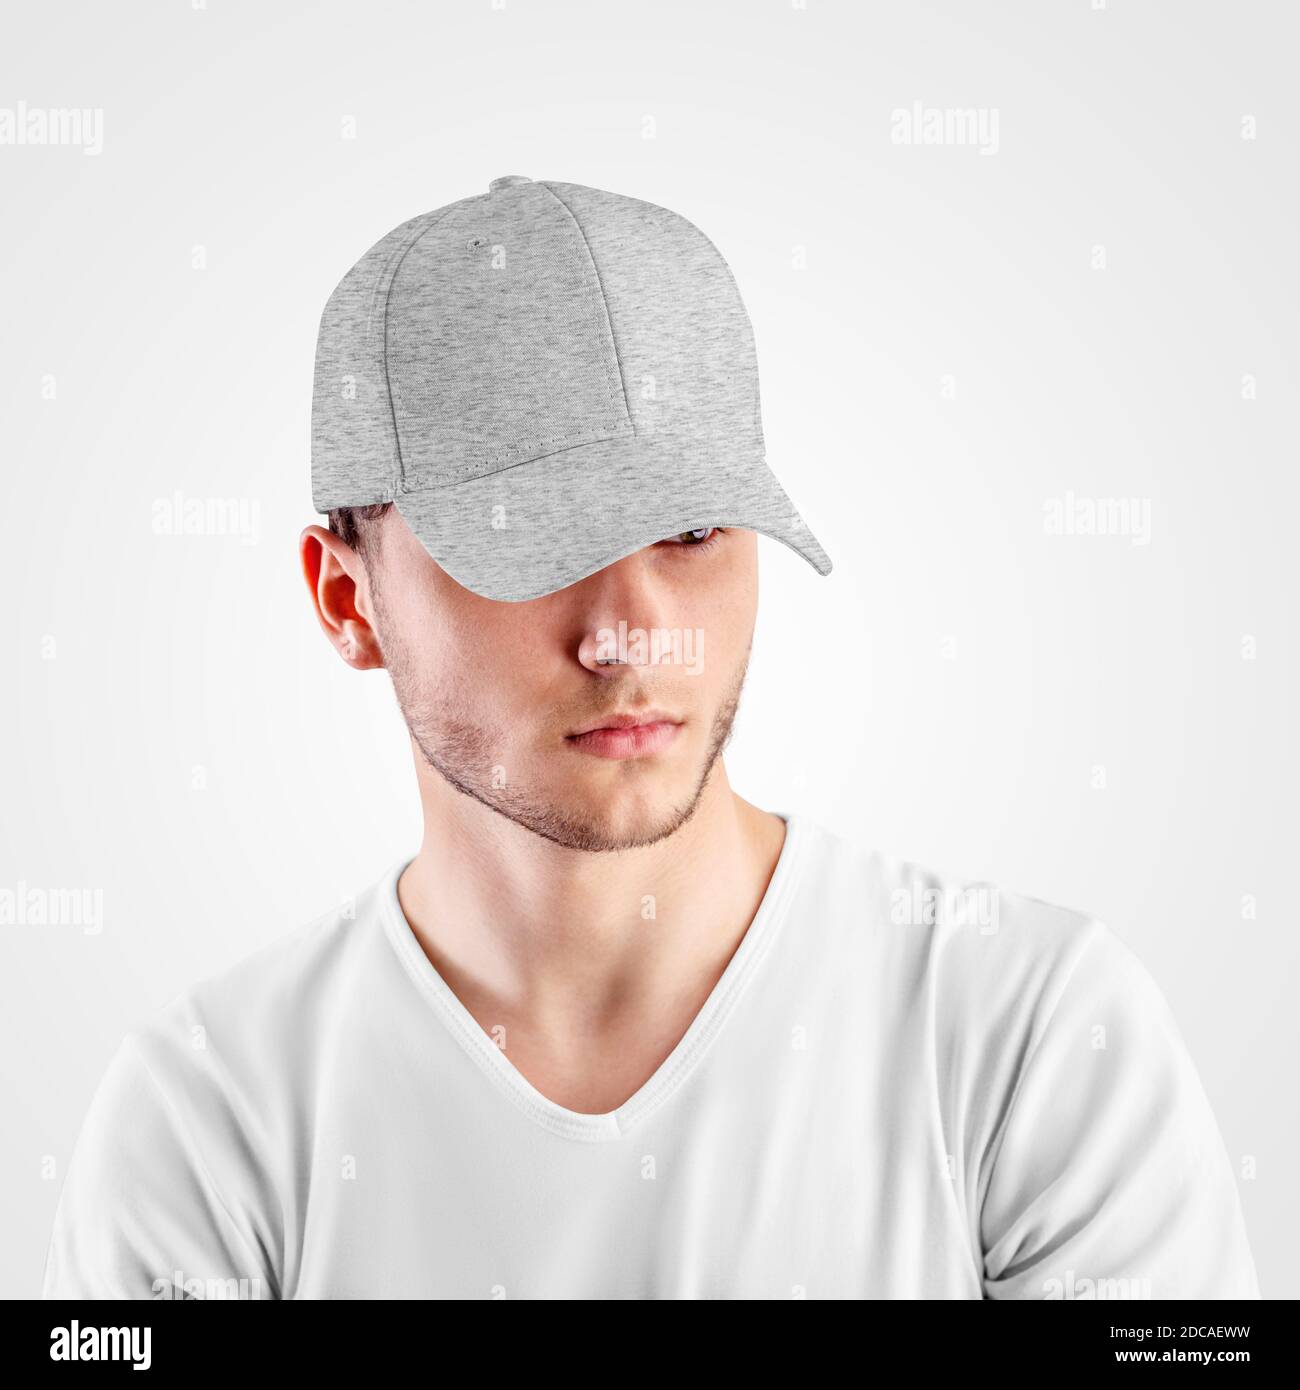 Mockup of gray heather baseball cap on a man's head, isolated on background, front view. Template of a sports, fashionable panama with a visor, for th Stock Photo